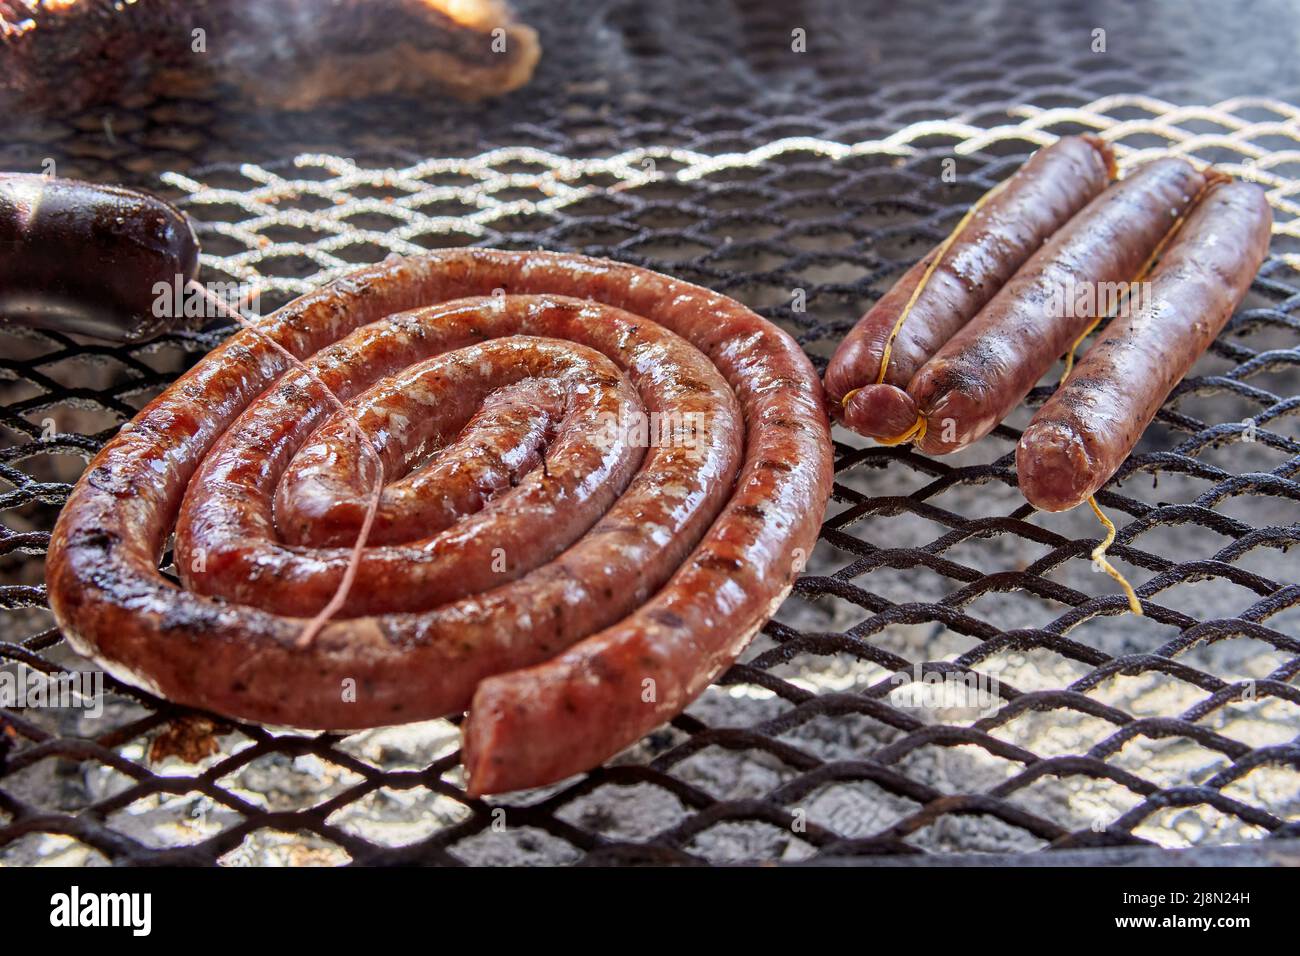 Close up of coil of a barbecue sausage and pork sausage on fire on grill. Typical argentine food on weekends Stock Photo